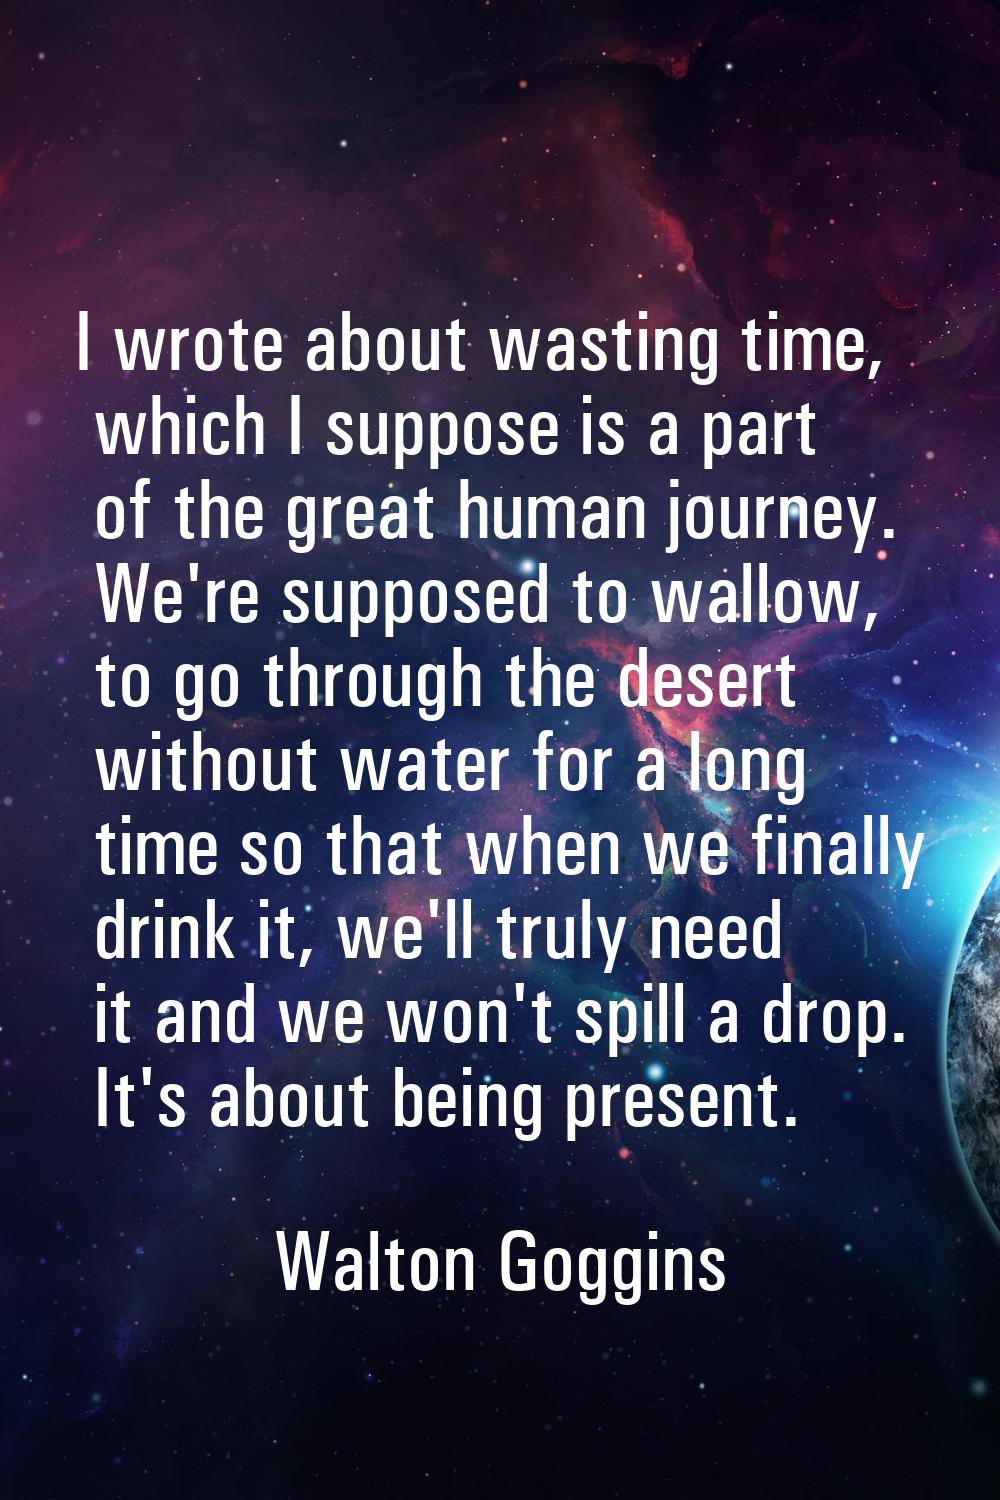 I wrote about wasting time, which I suppose is a part of the great human journey. We're supposed to